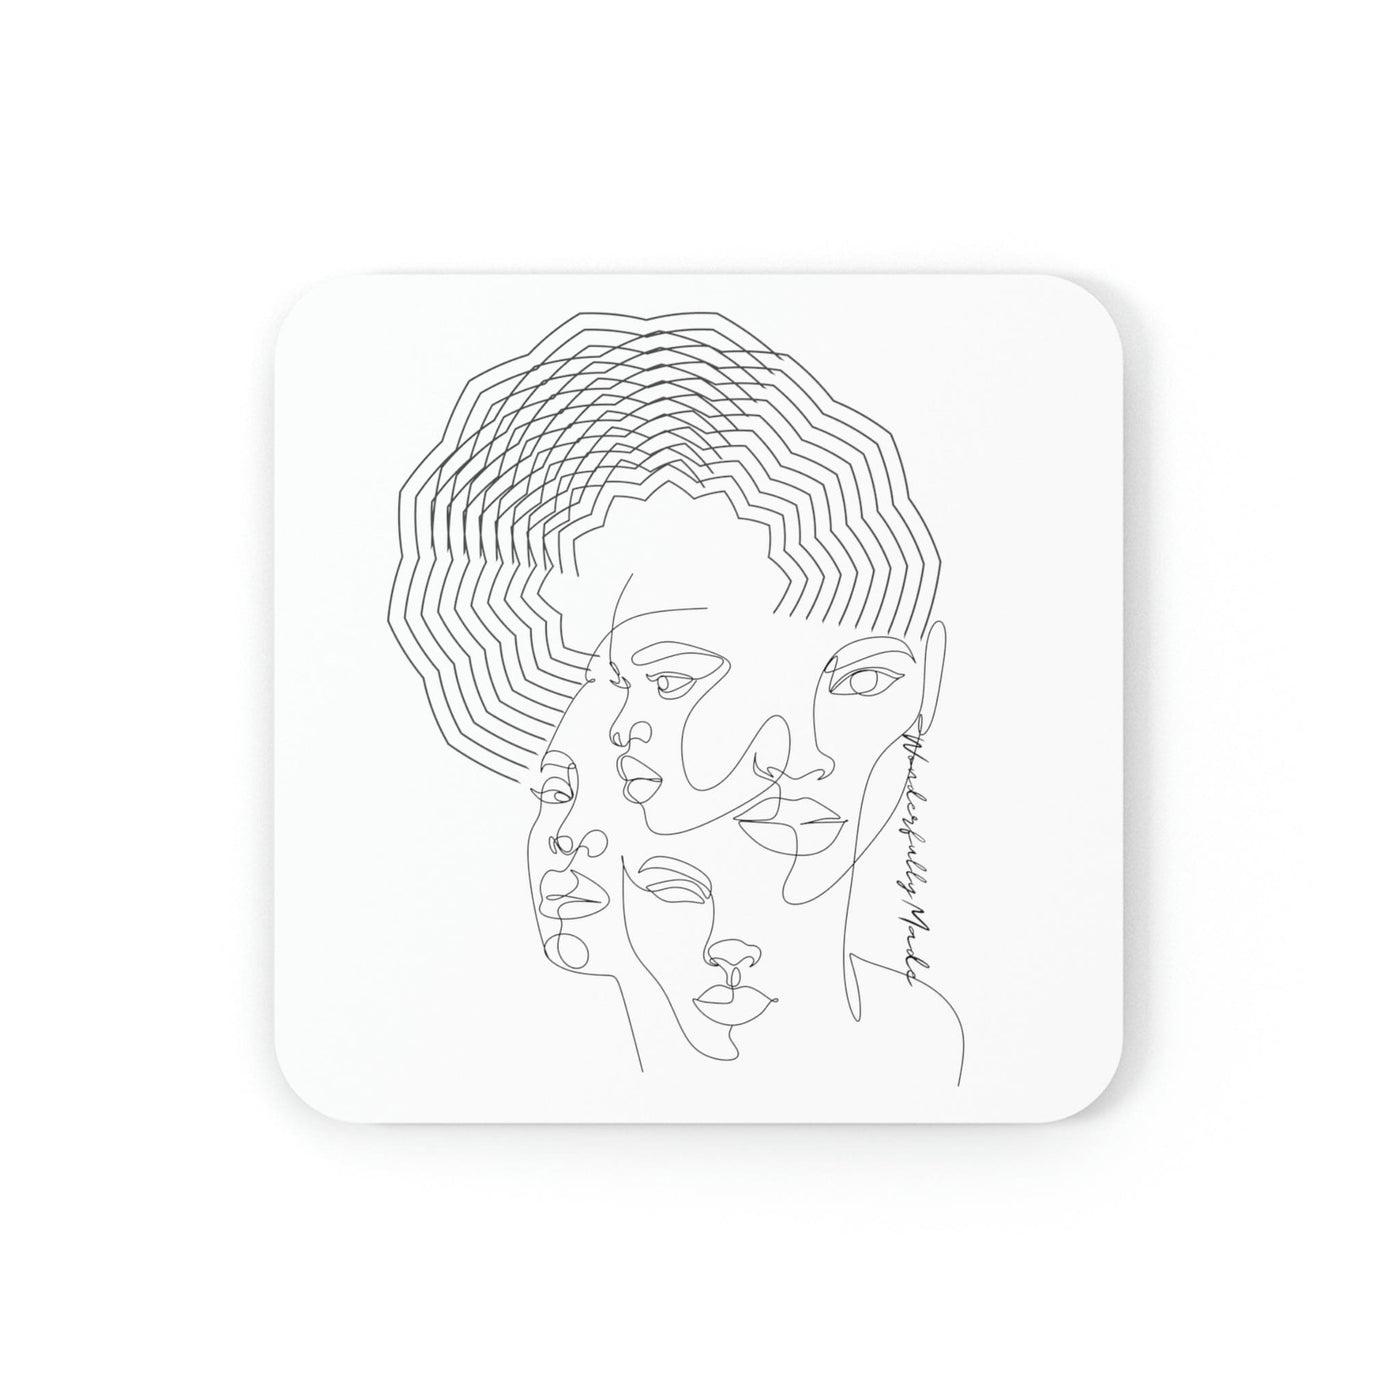 Home Decor Coaster Set - 4 Piece Home/office Every Woman Is Wonderfully Made